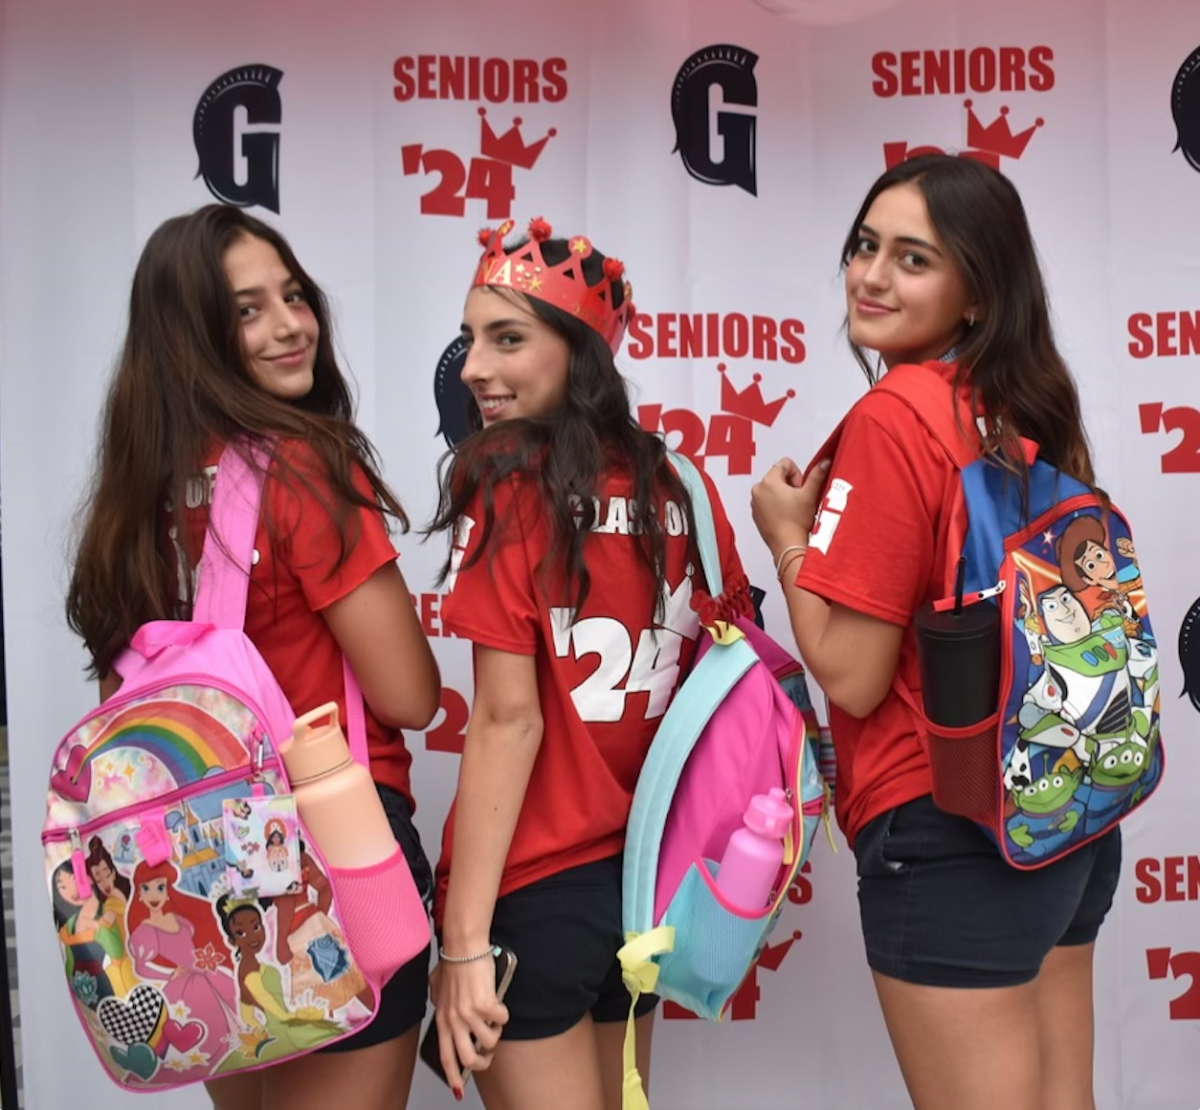 As seniors enter school for their last first day, they carry the one thing that allows them to reminisce about their first days of school: character backpacks. Luciana Hornstein, Ana Catherine Guimaraes, and Sofia Gershanik showed off their backpacks in front of the senior backdrop. Seniors were excited to rock backpacks with a variety of childish prints. 